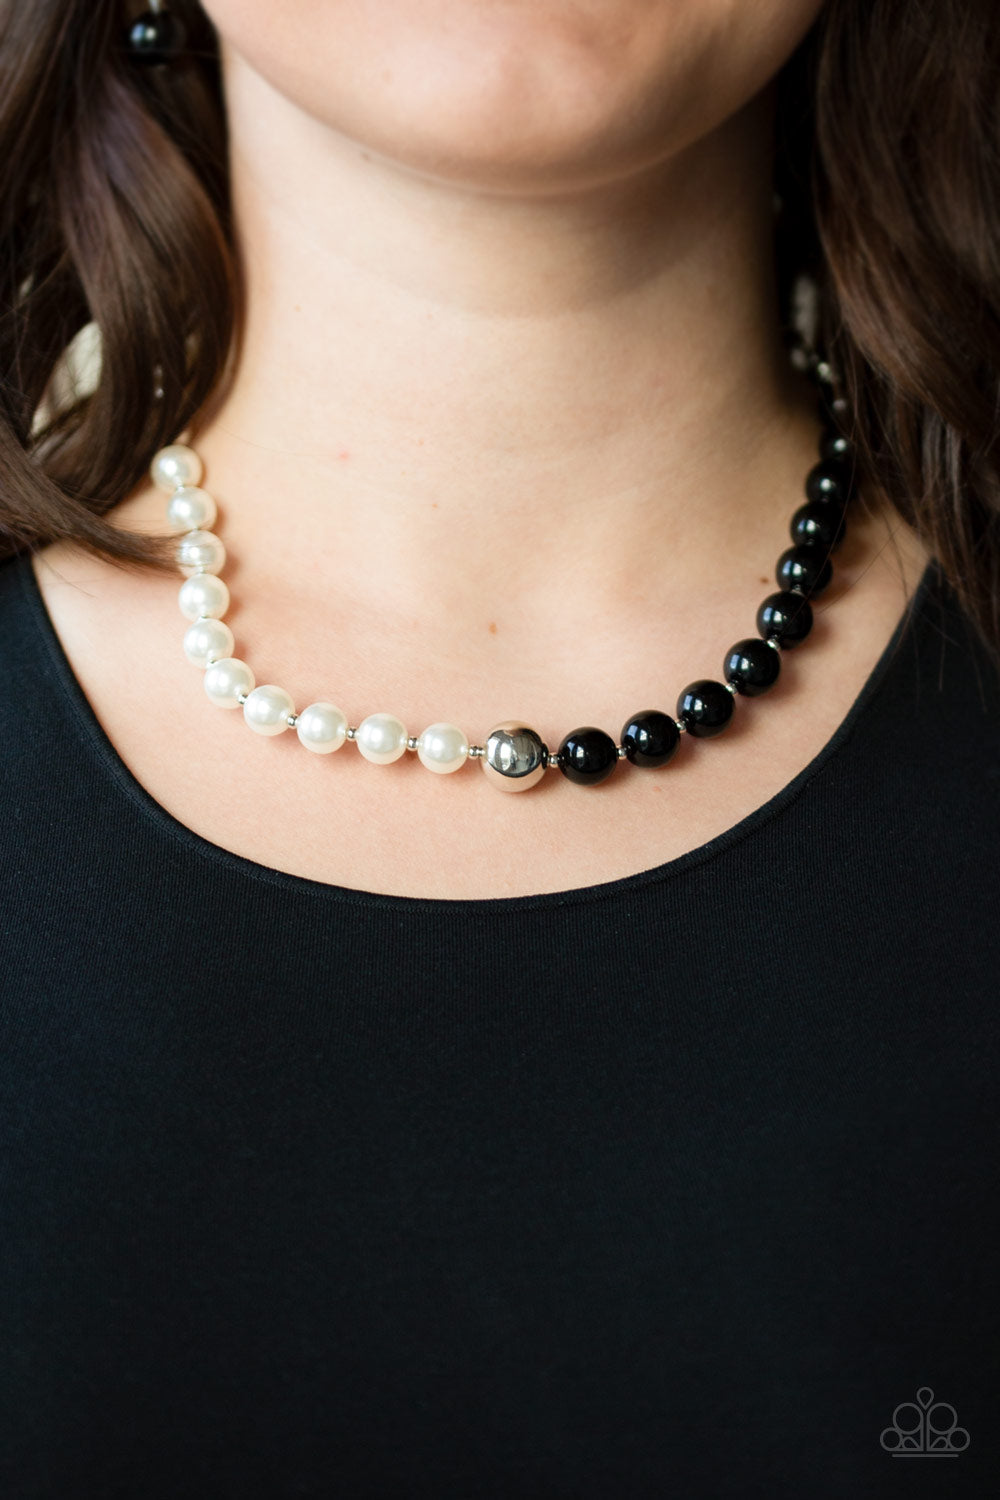 Paparazzi 5th Avenue A-Lister - Black - White Pearls - Necklace & Earrings - $5 Jewelry with Ashley Swint